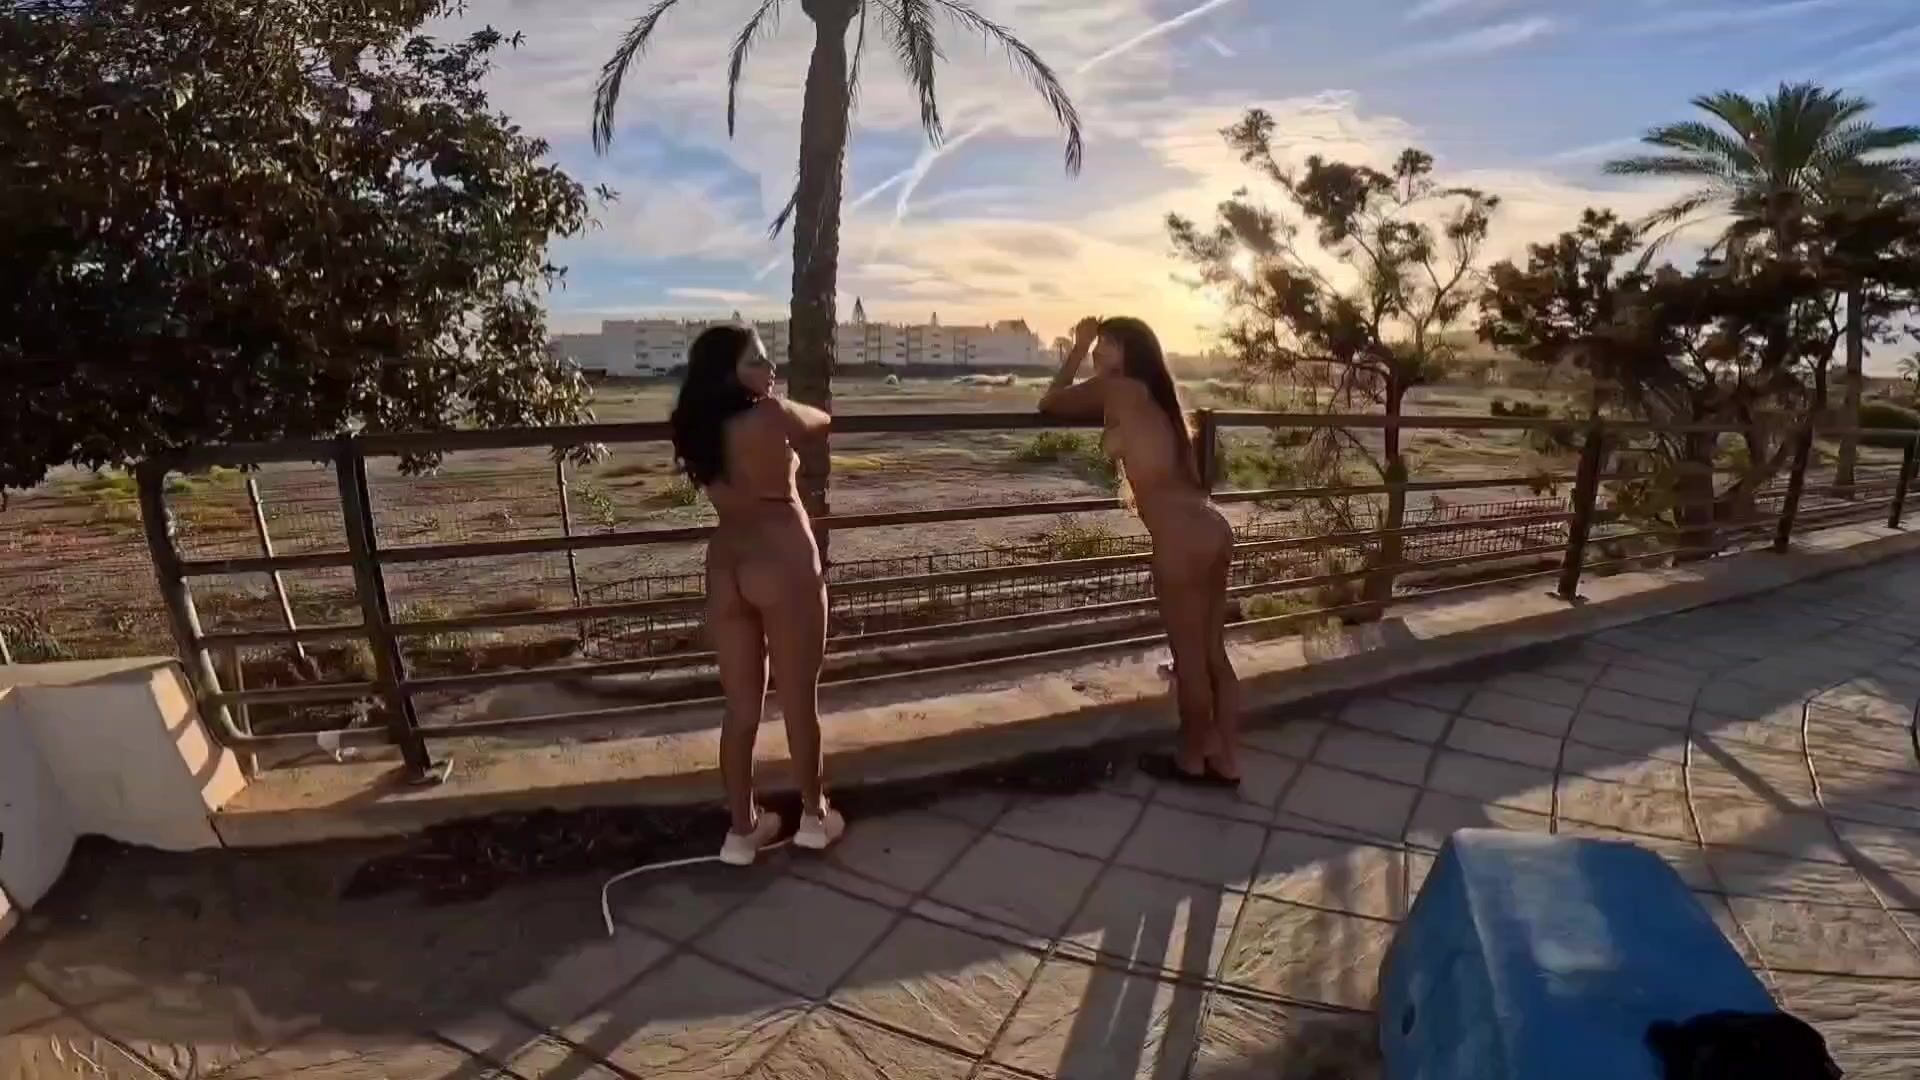 A Japanese and a Latina naked in public